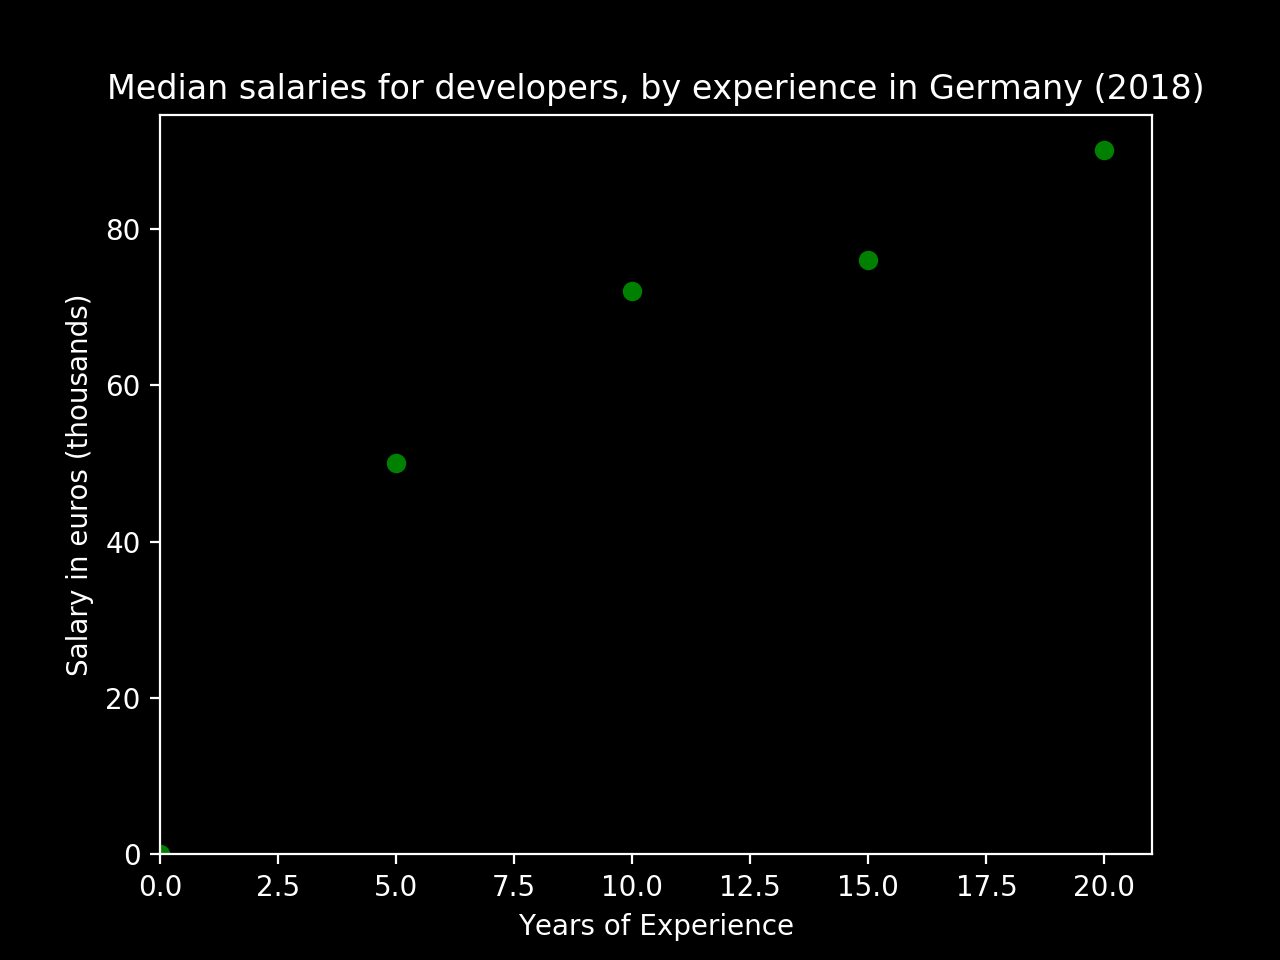 Figure 1) Median yearly salaries for developers, in thousands of euros, by experience in Germany (2018)